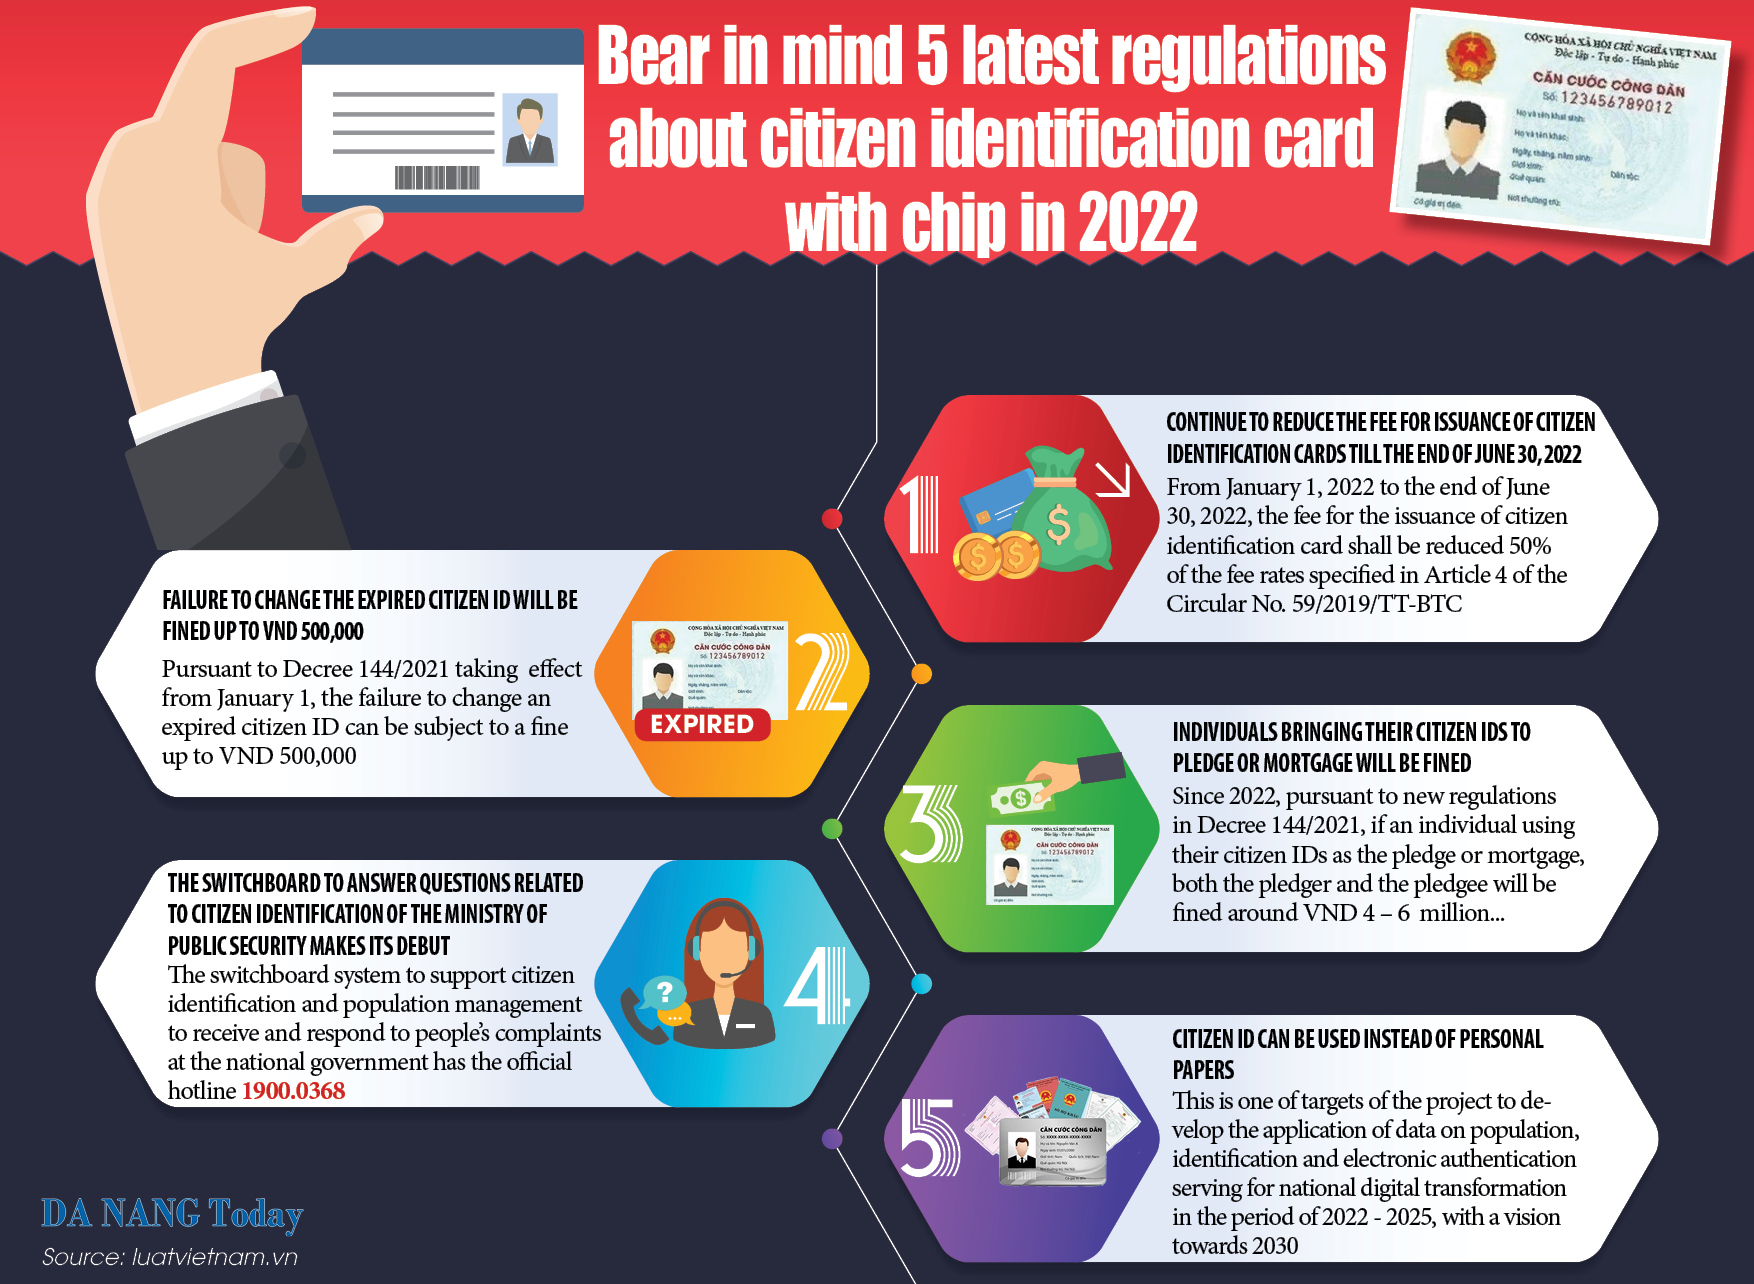 Bear in mind 5 latest regulations about citizen identification card with  chip in 2022 - Da Nang Today - News - eNewspaper